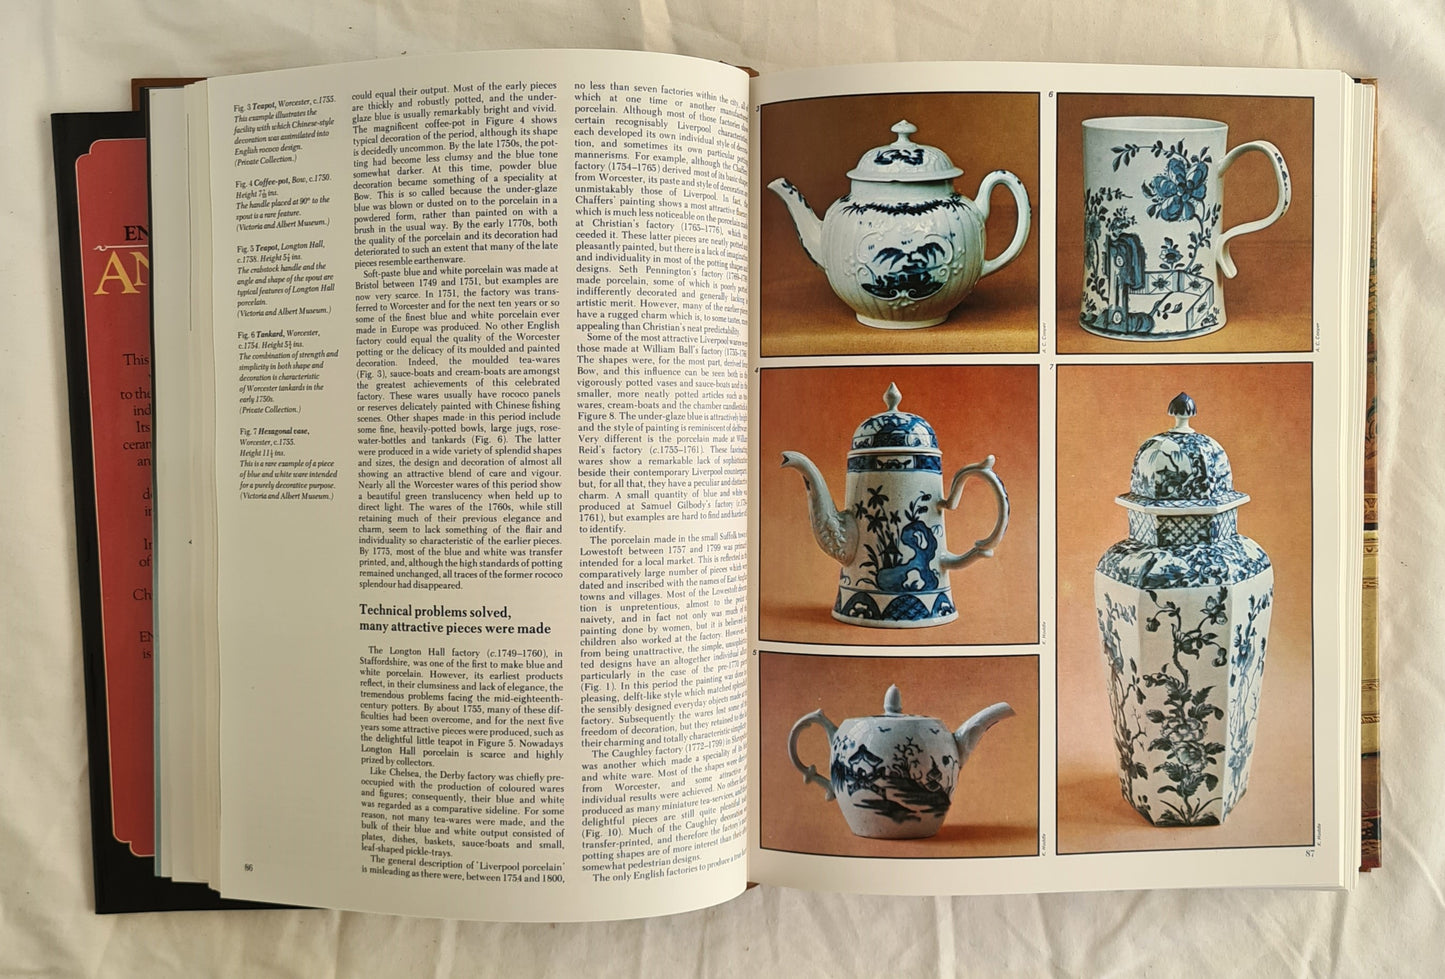 Encyclopedia of Antiques by Arthur Negus and Rosemary Klein